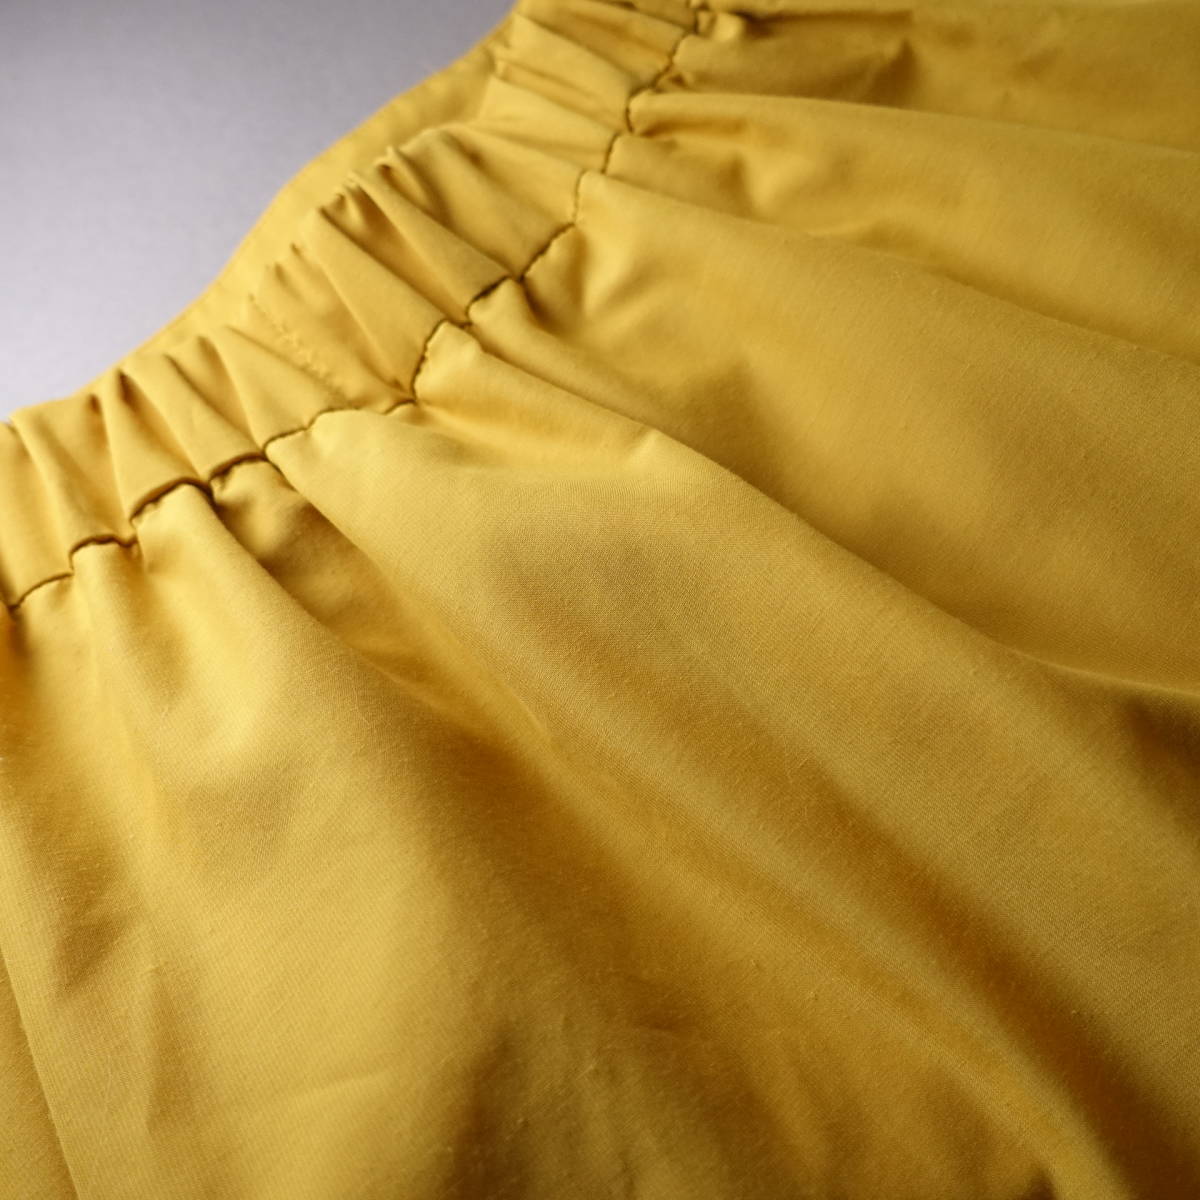 NATURAL BEAUTY BASIC/ Natural Beauty Basic /S/ waist rubber / long skirt / yellow / yellow color / lady's 